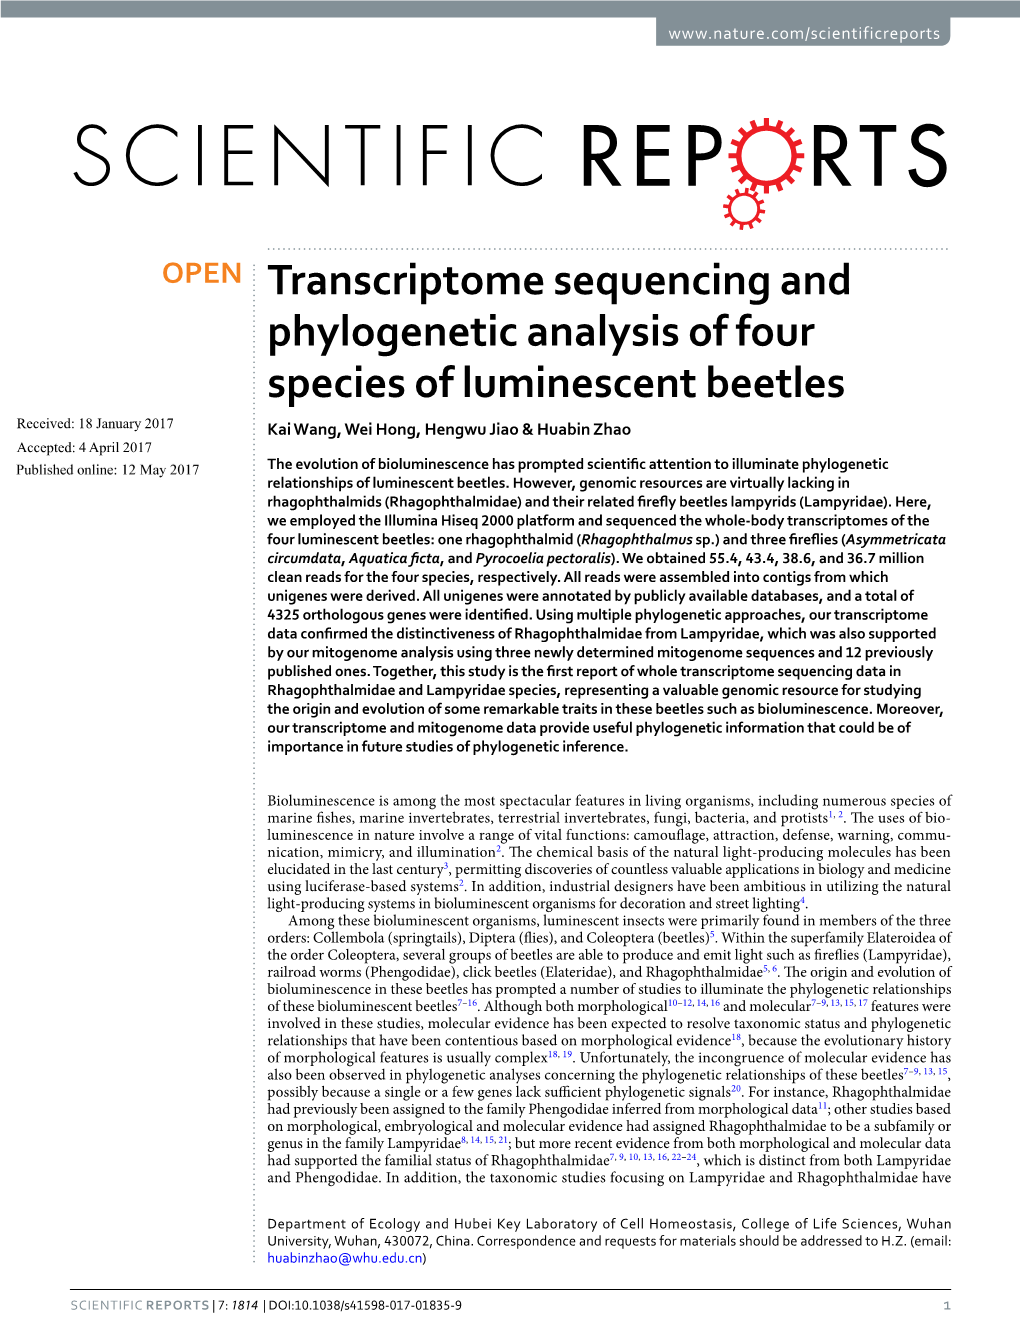 Transcriptome Sequencing and Phylogenetic Analysis of Four Species of Luminescent Beetles